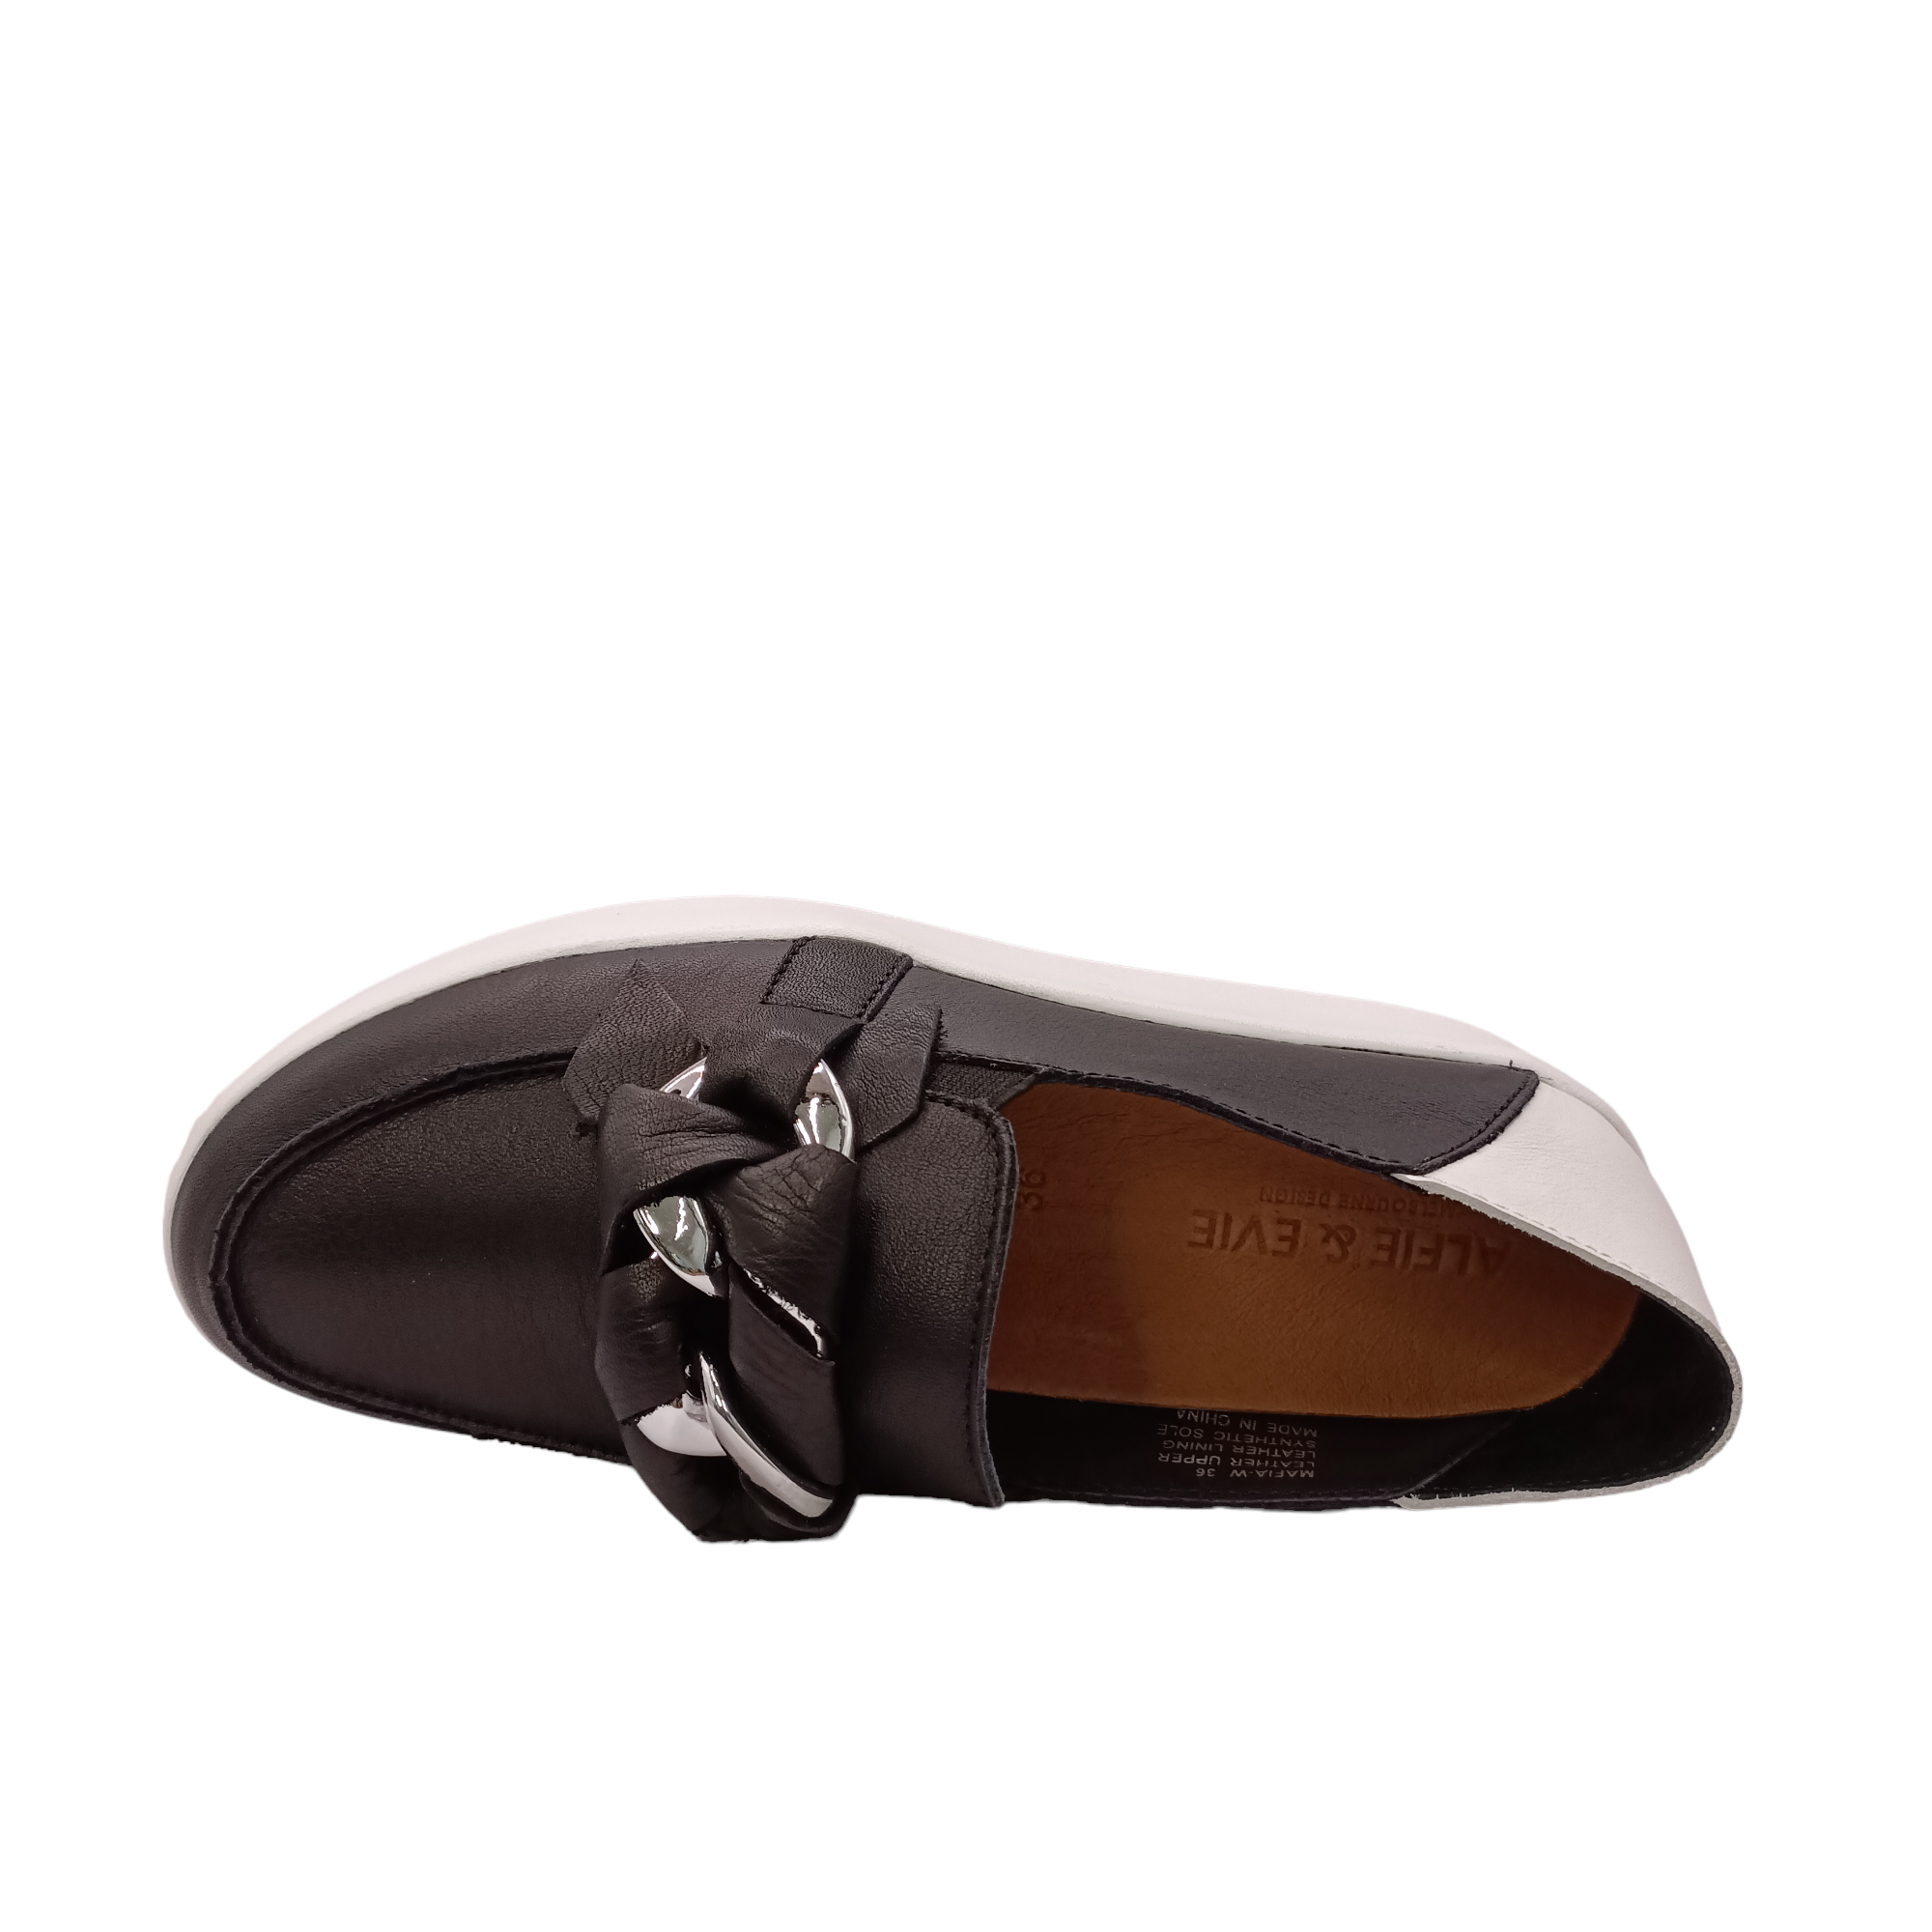 Top view of black slip on shoe called mafia from Alfie &amp; Evie. Black leather laced in silver chain decorating the top, white leather heel with a white sole. Shop Alfie &amp; Evie Womens Shoes online and In-Store with shoe&amp;me Mount Maunganui.